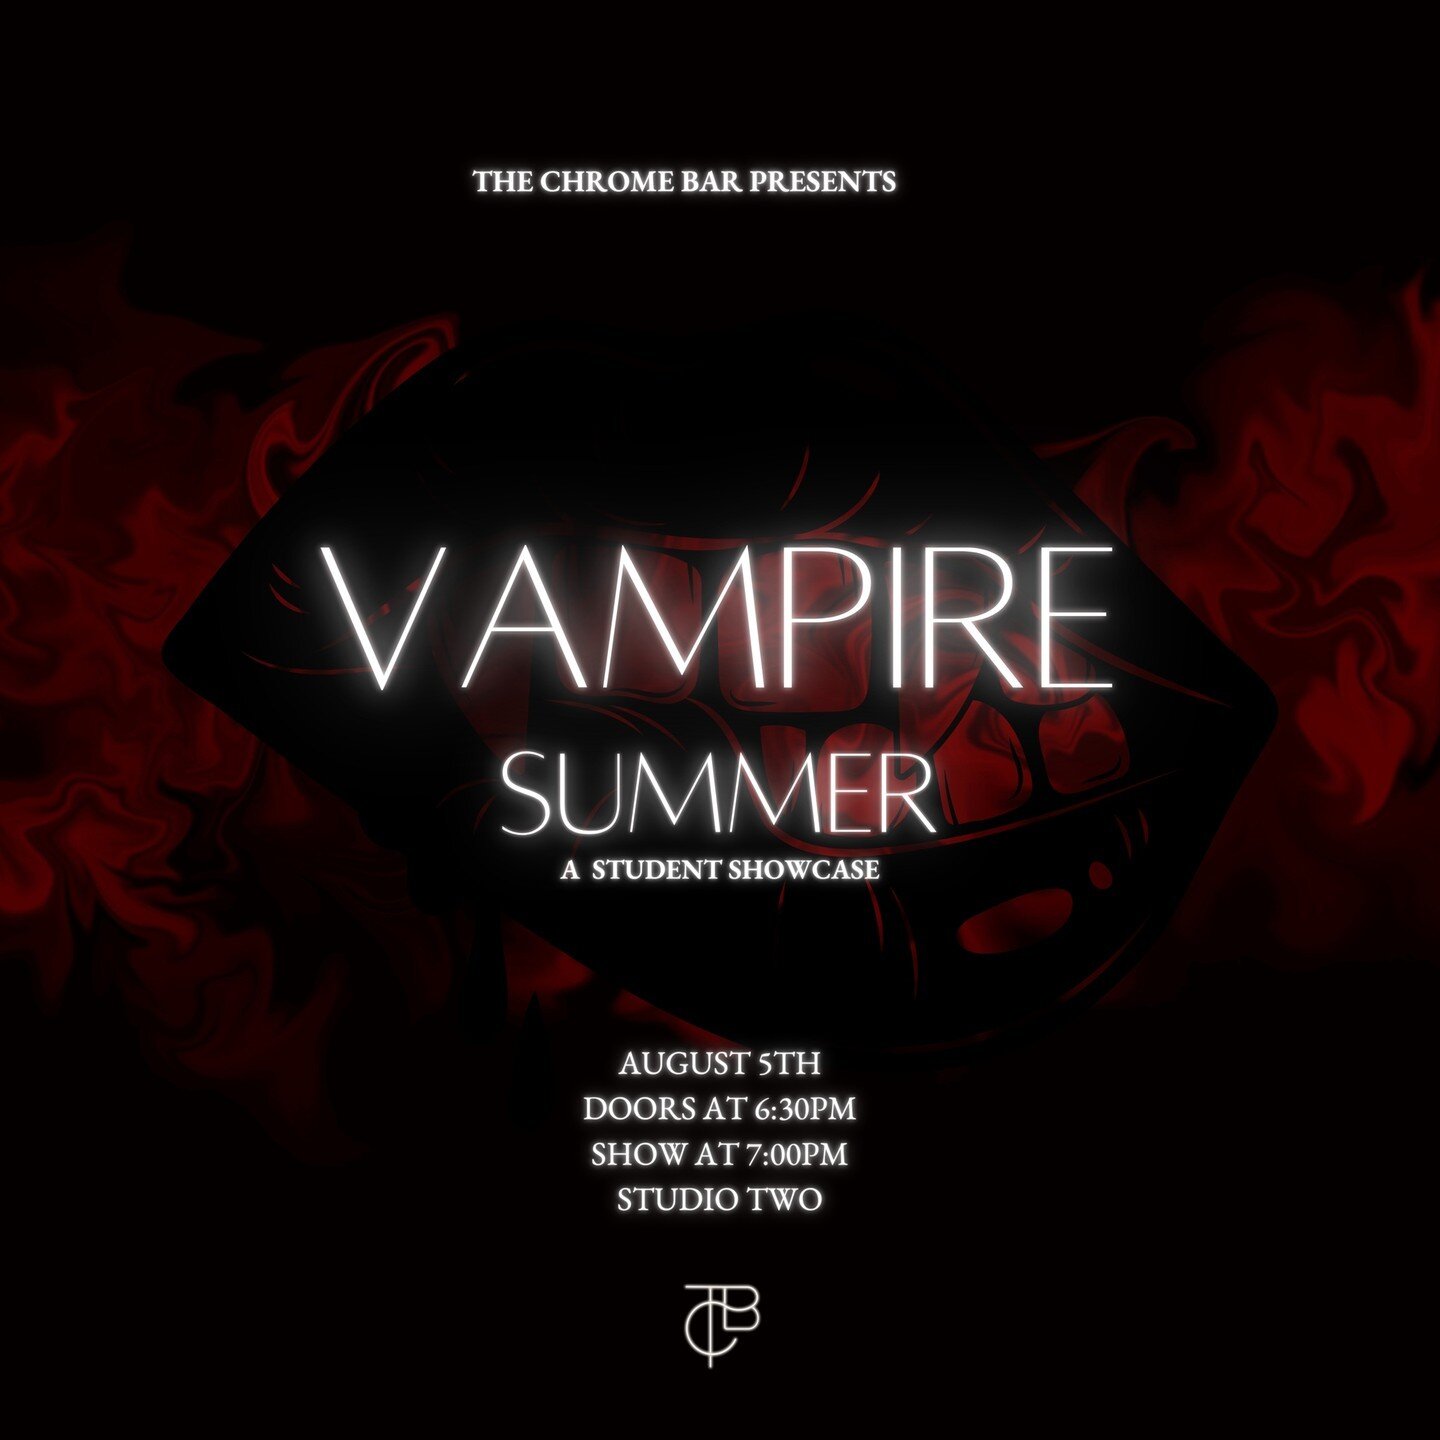 We&rsquo;re excited to announce our first student showcase to take place at The Chrome Bar: Vampire Summer! We&rsquo;ll be taking submissions from ACTIVE students through the end of the month! LIMITED show spots this round, So get your applications i